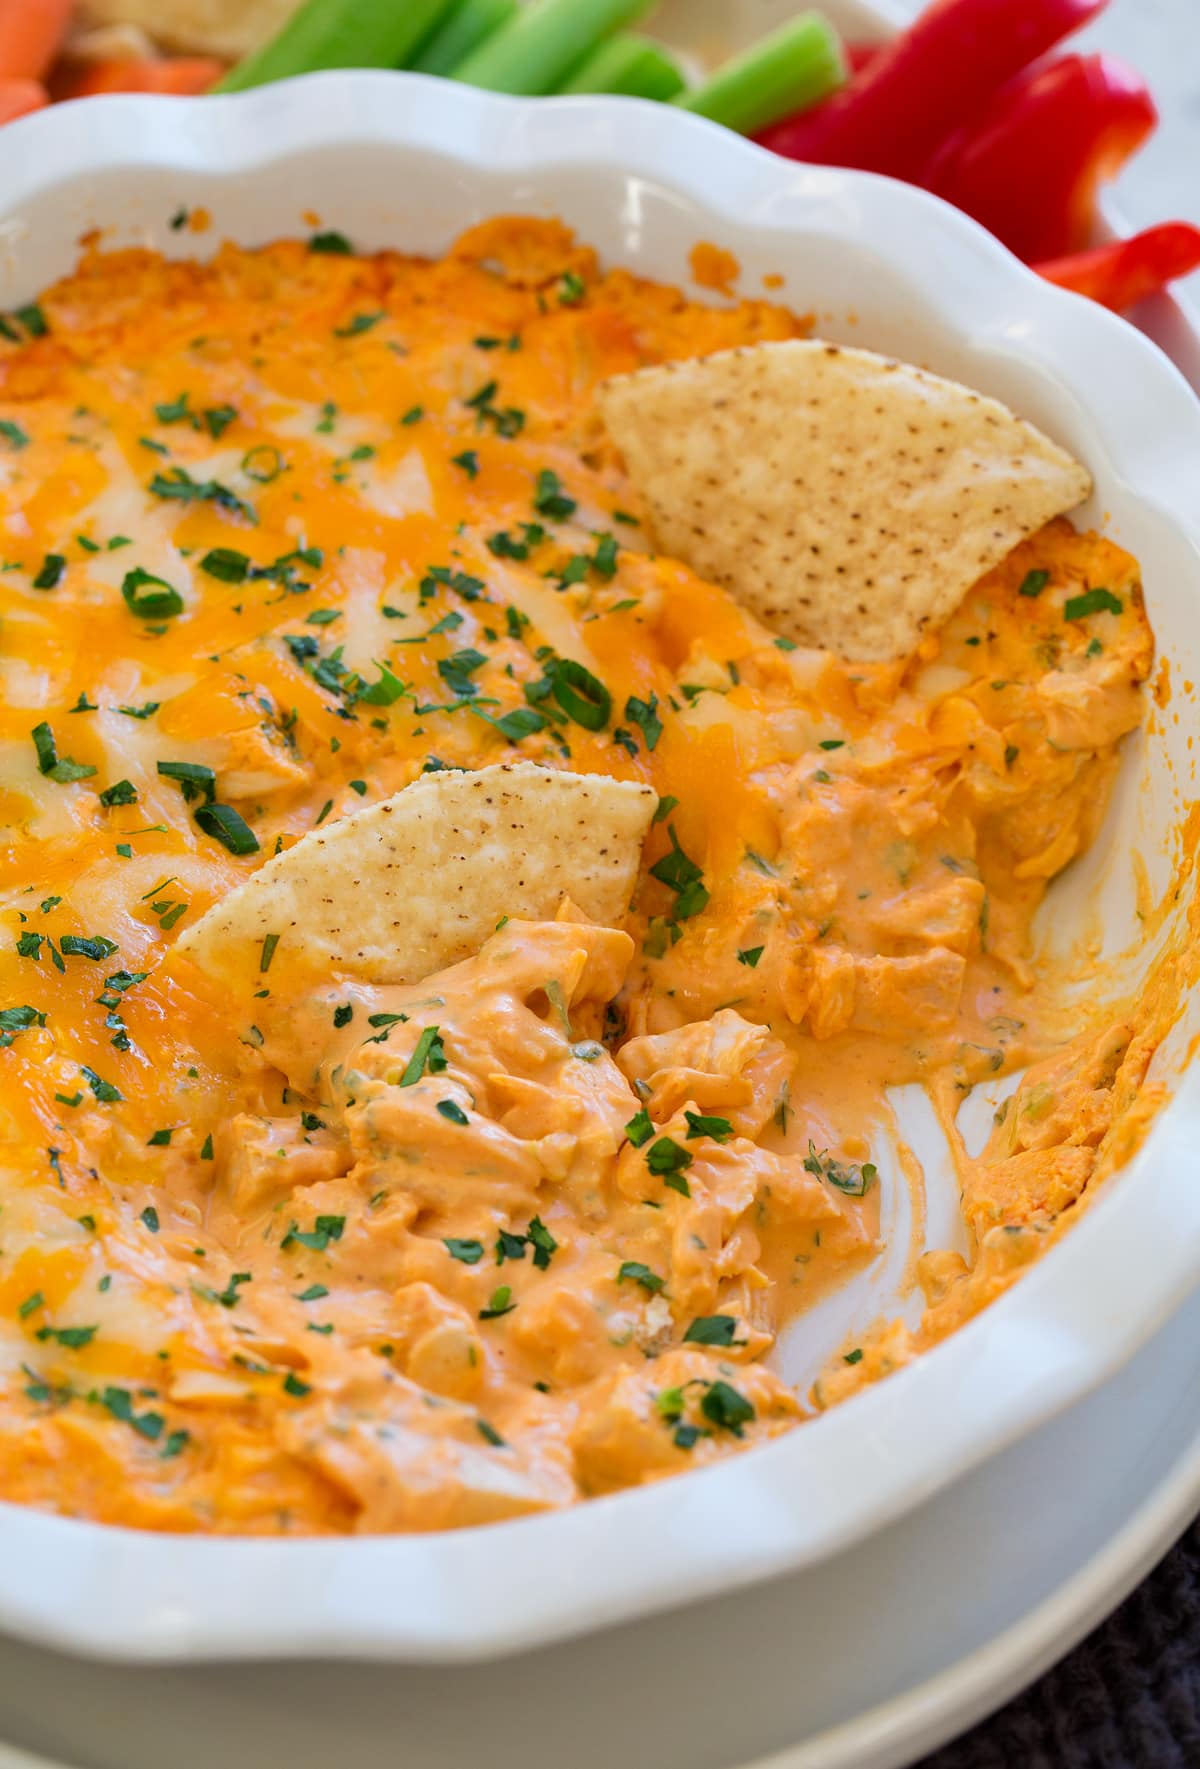 Buffalo chicken dip in a ceramic white pie dish. Shown with tortilla chips dipped in.